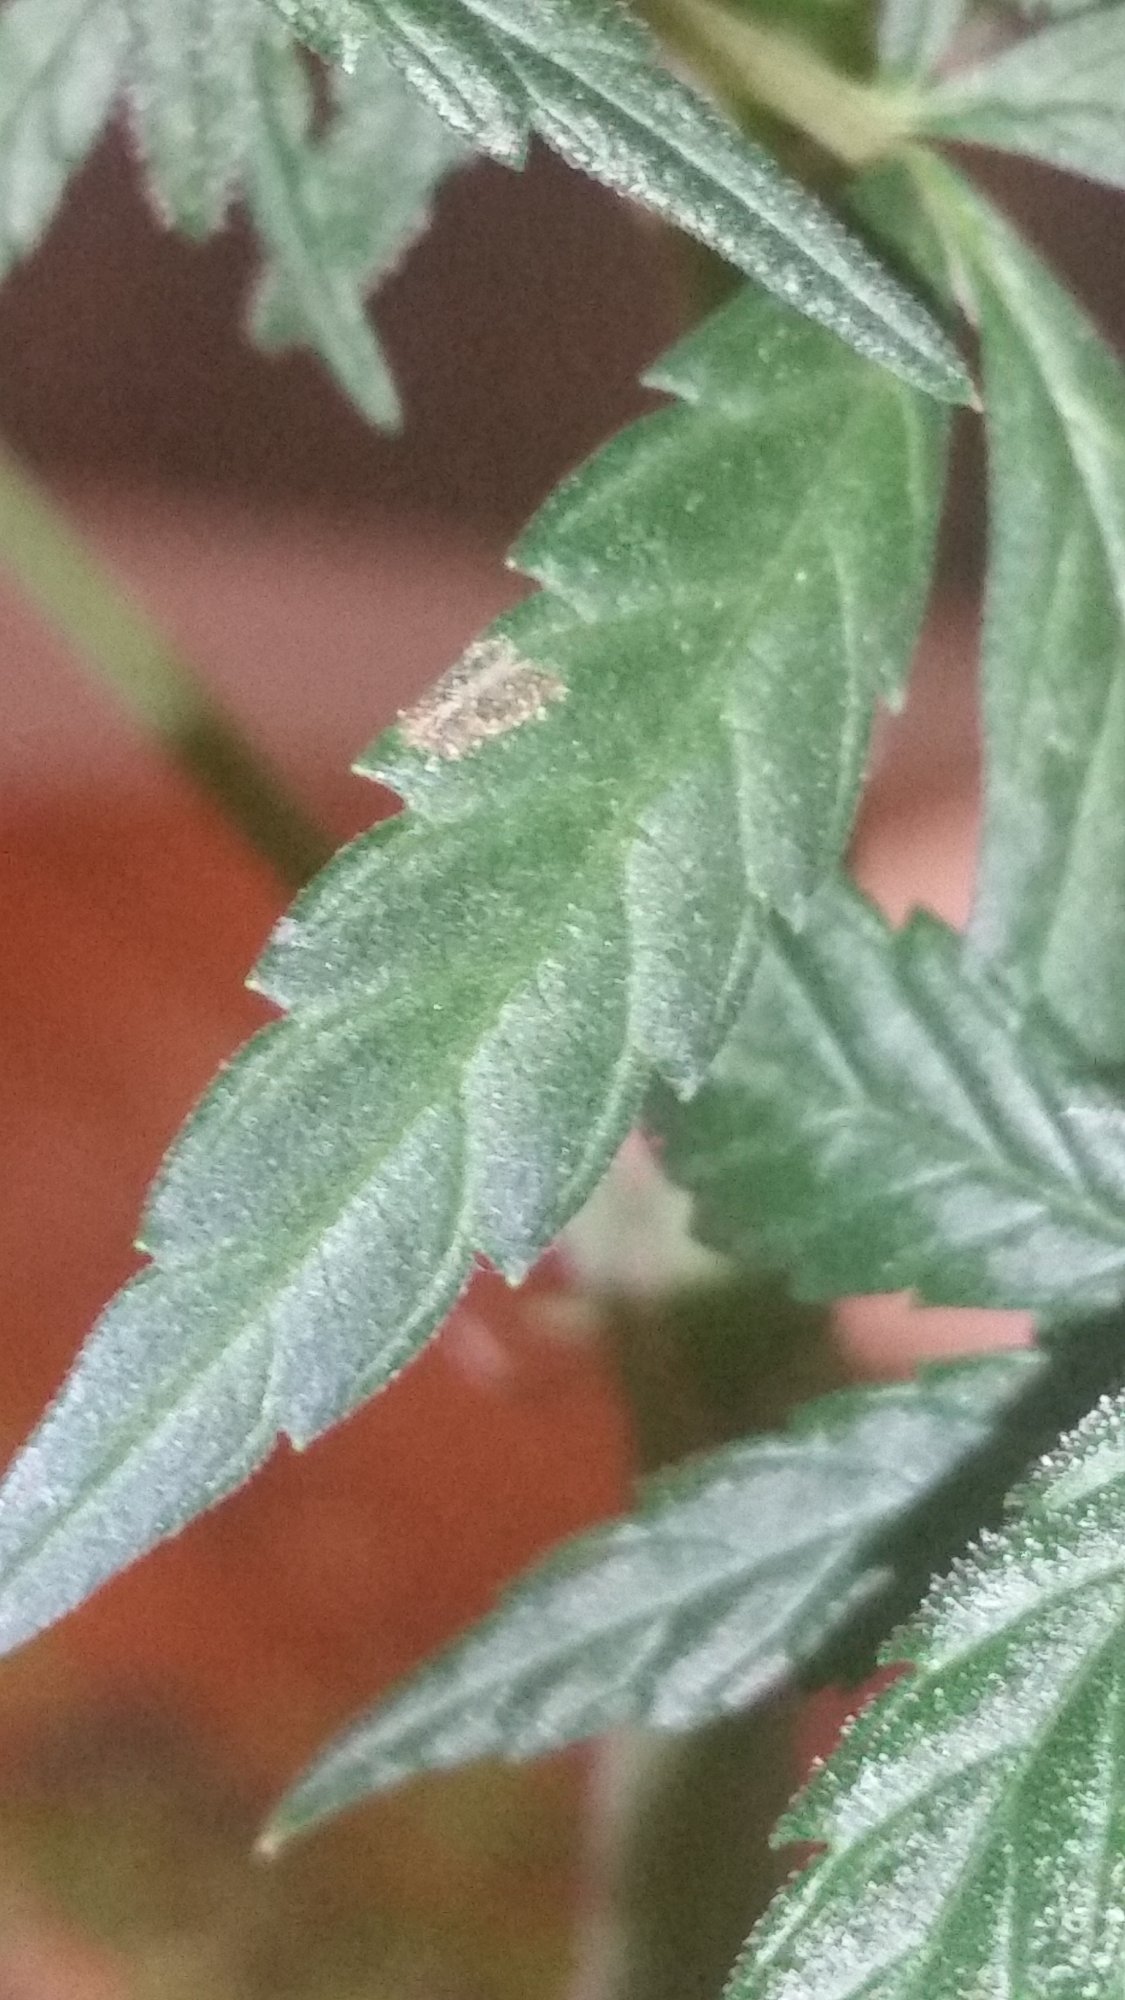 What is this deficiency toxicity or other